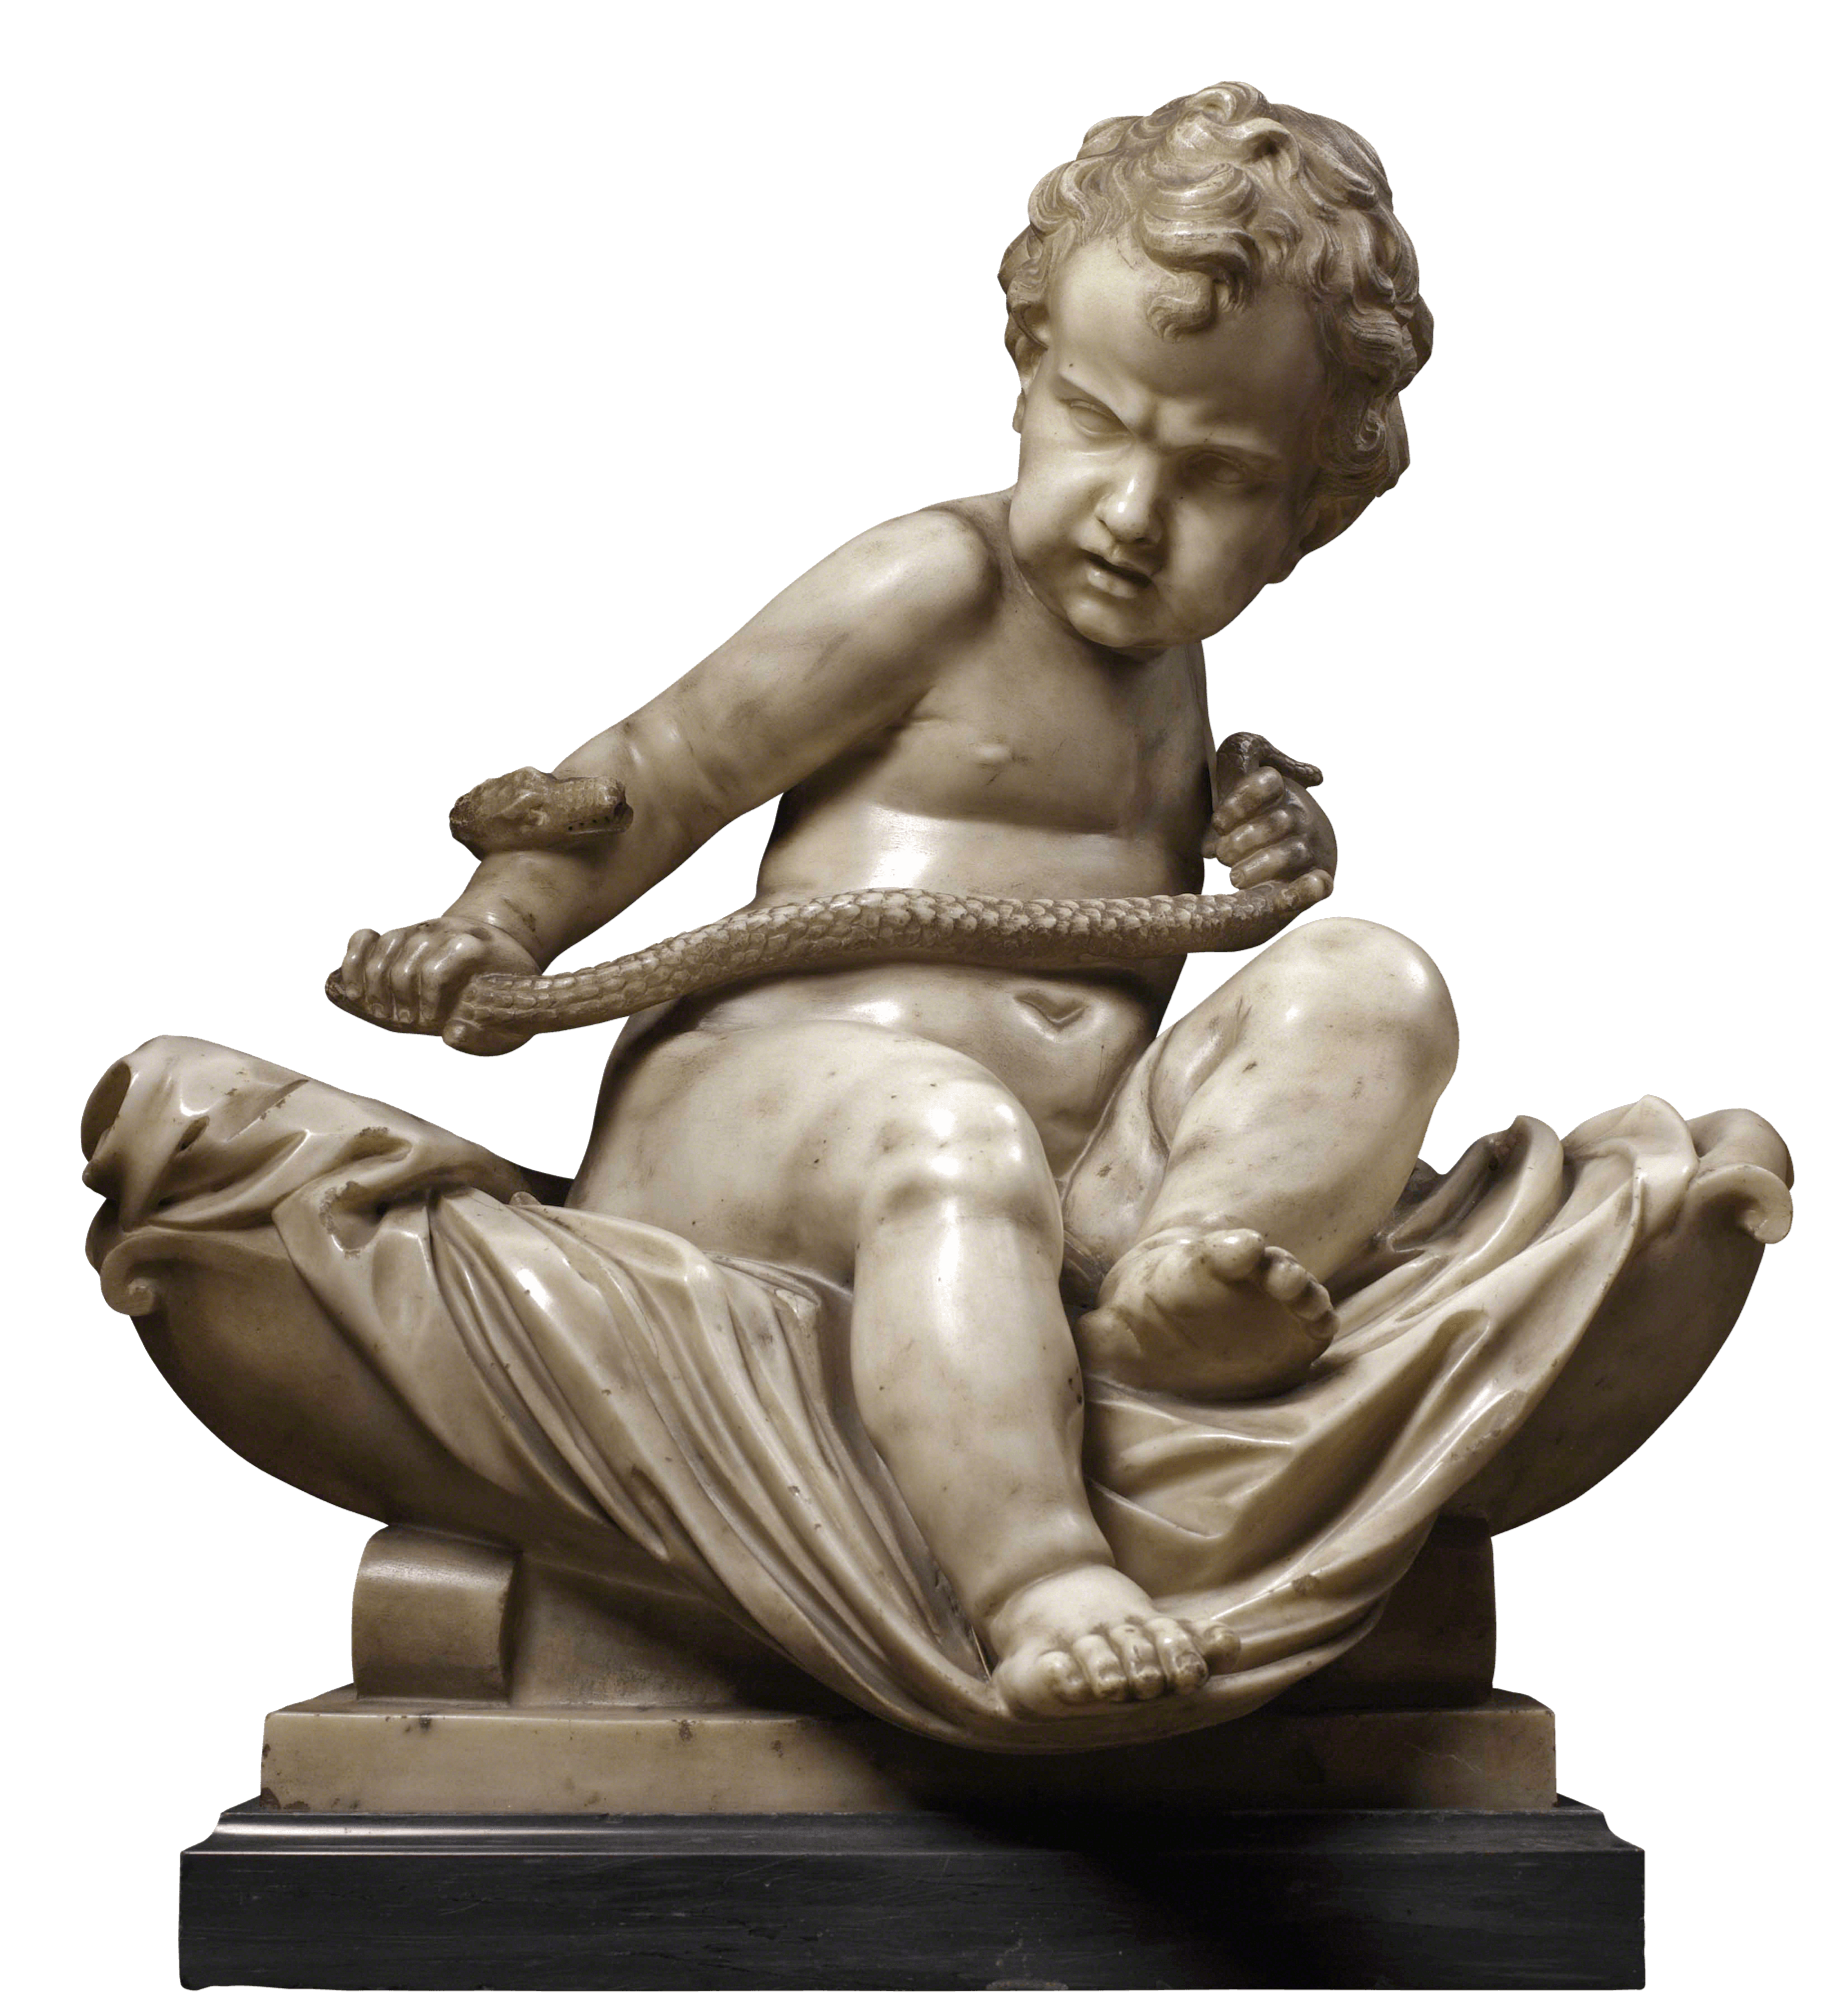 Statue of Hercules as a child fighting with a snake